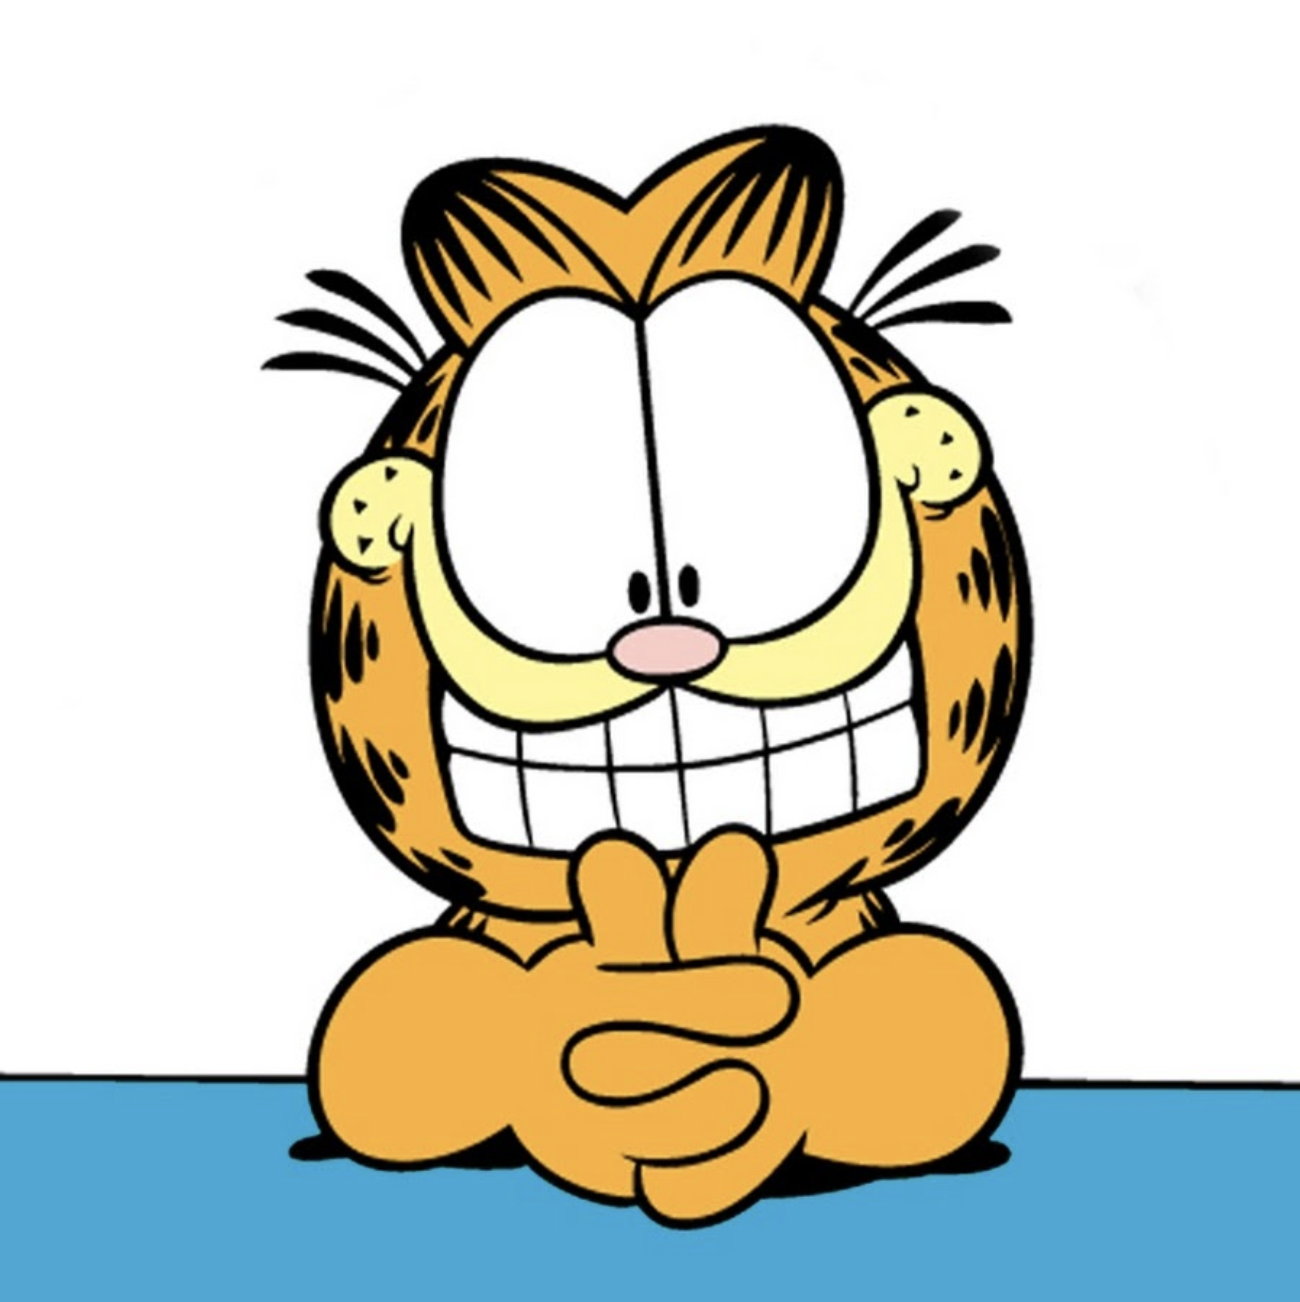 Today in history: Garfield, the cat cartoon character, made its debut in  1978 | News - Times of India Videos